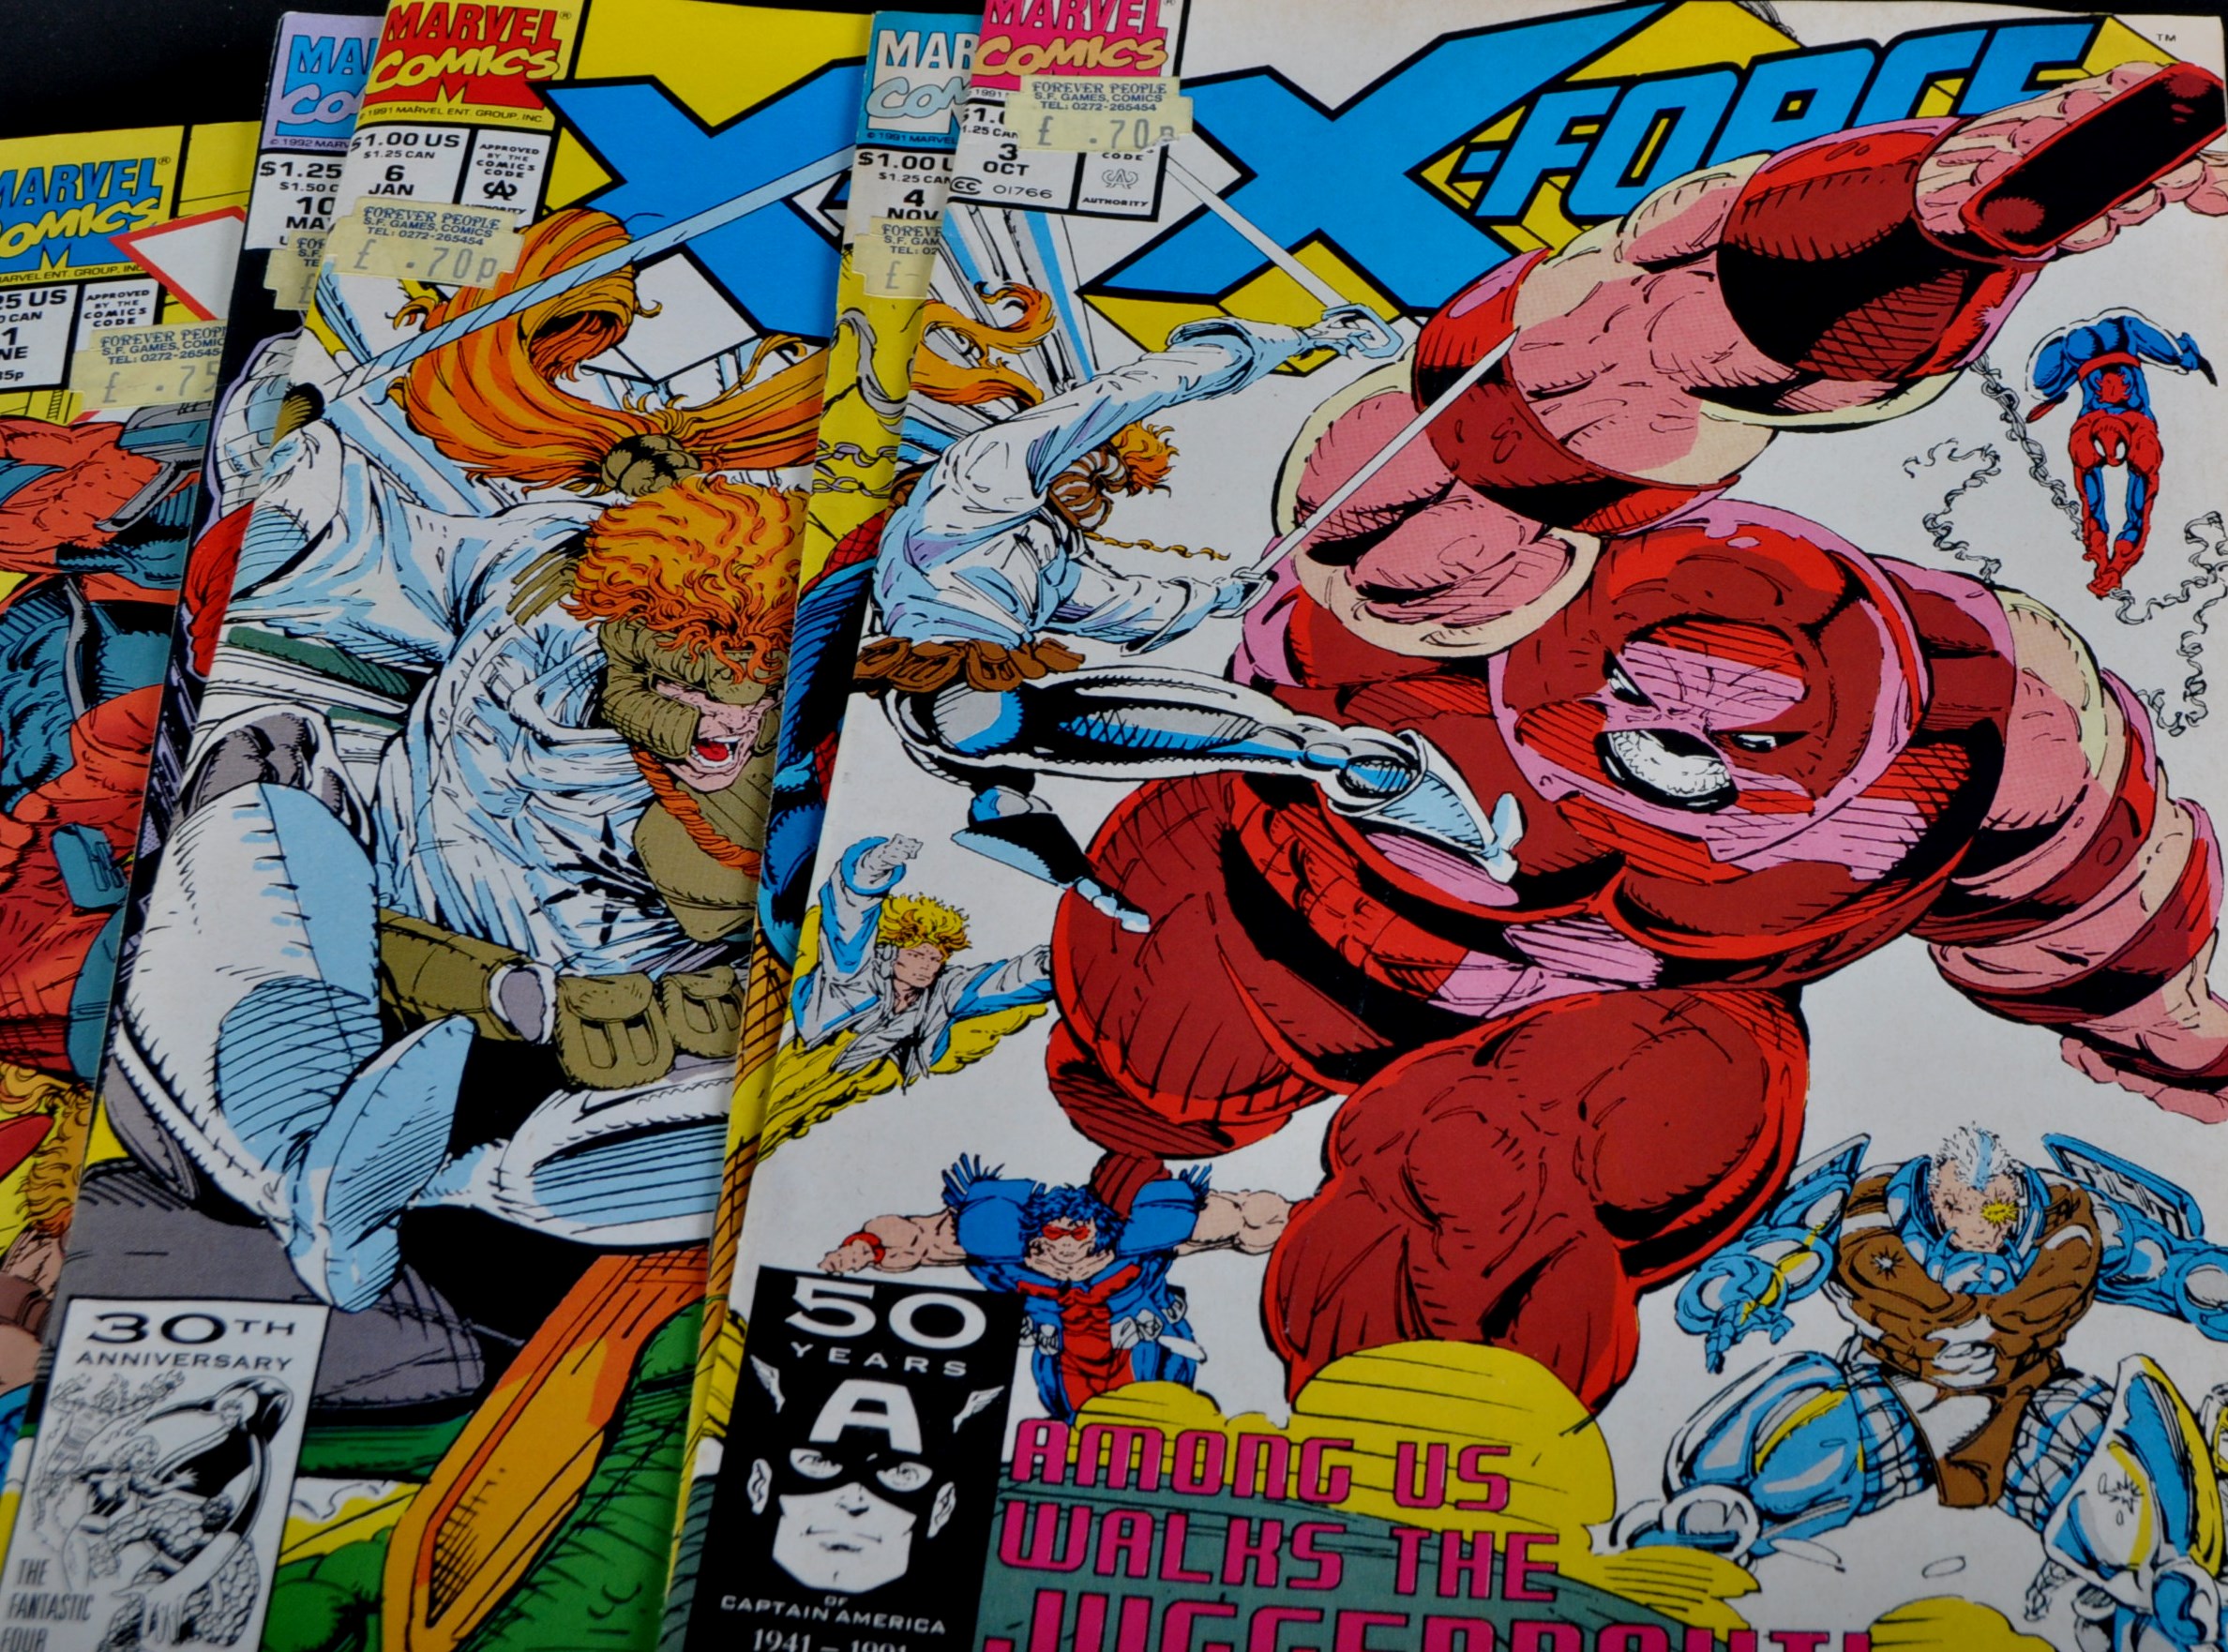 MARVEL COMICS - X-FORCE - COLLECTION OF COMIC BOOKS - Image 3 of 5